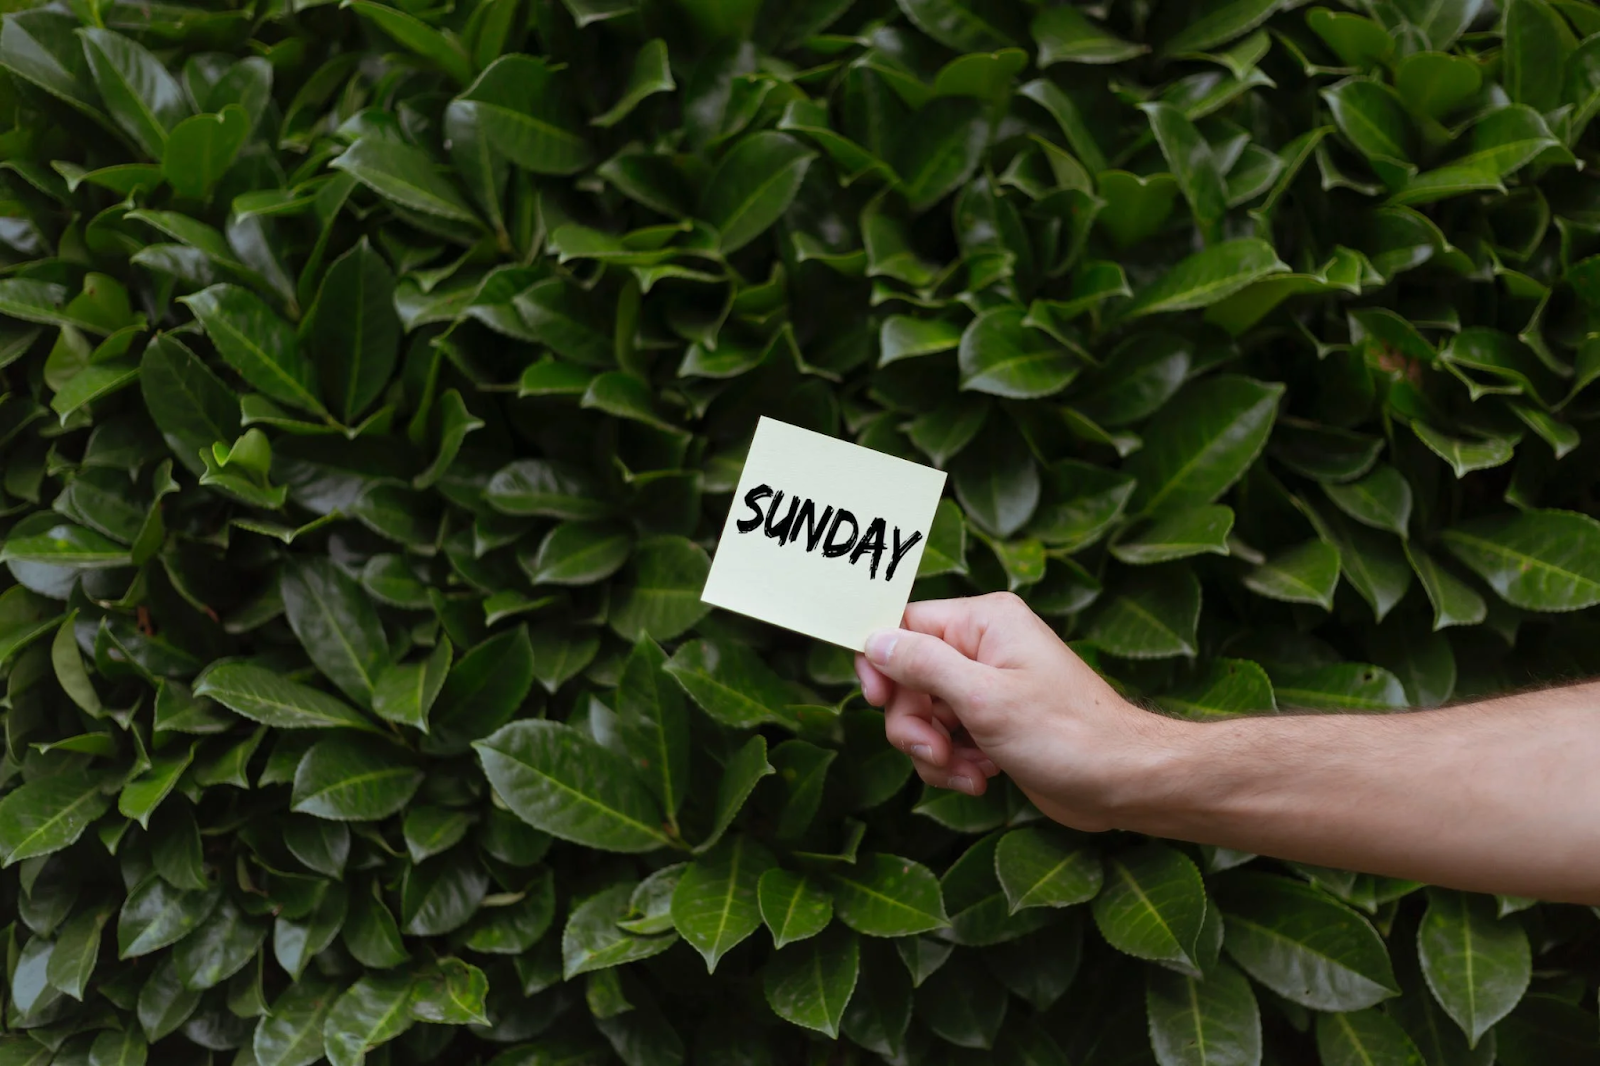 A person holding a post-it note with Sunday written on it